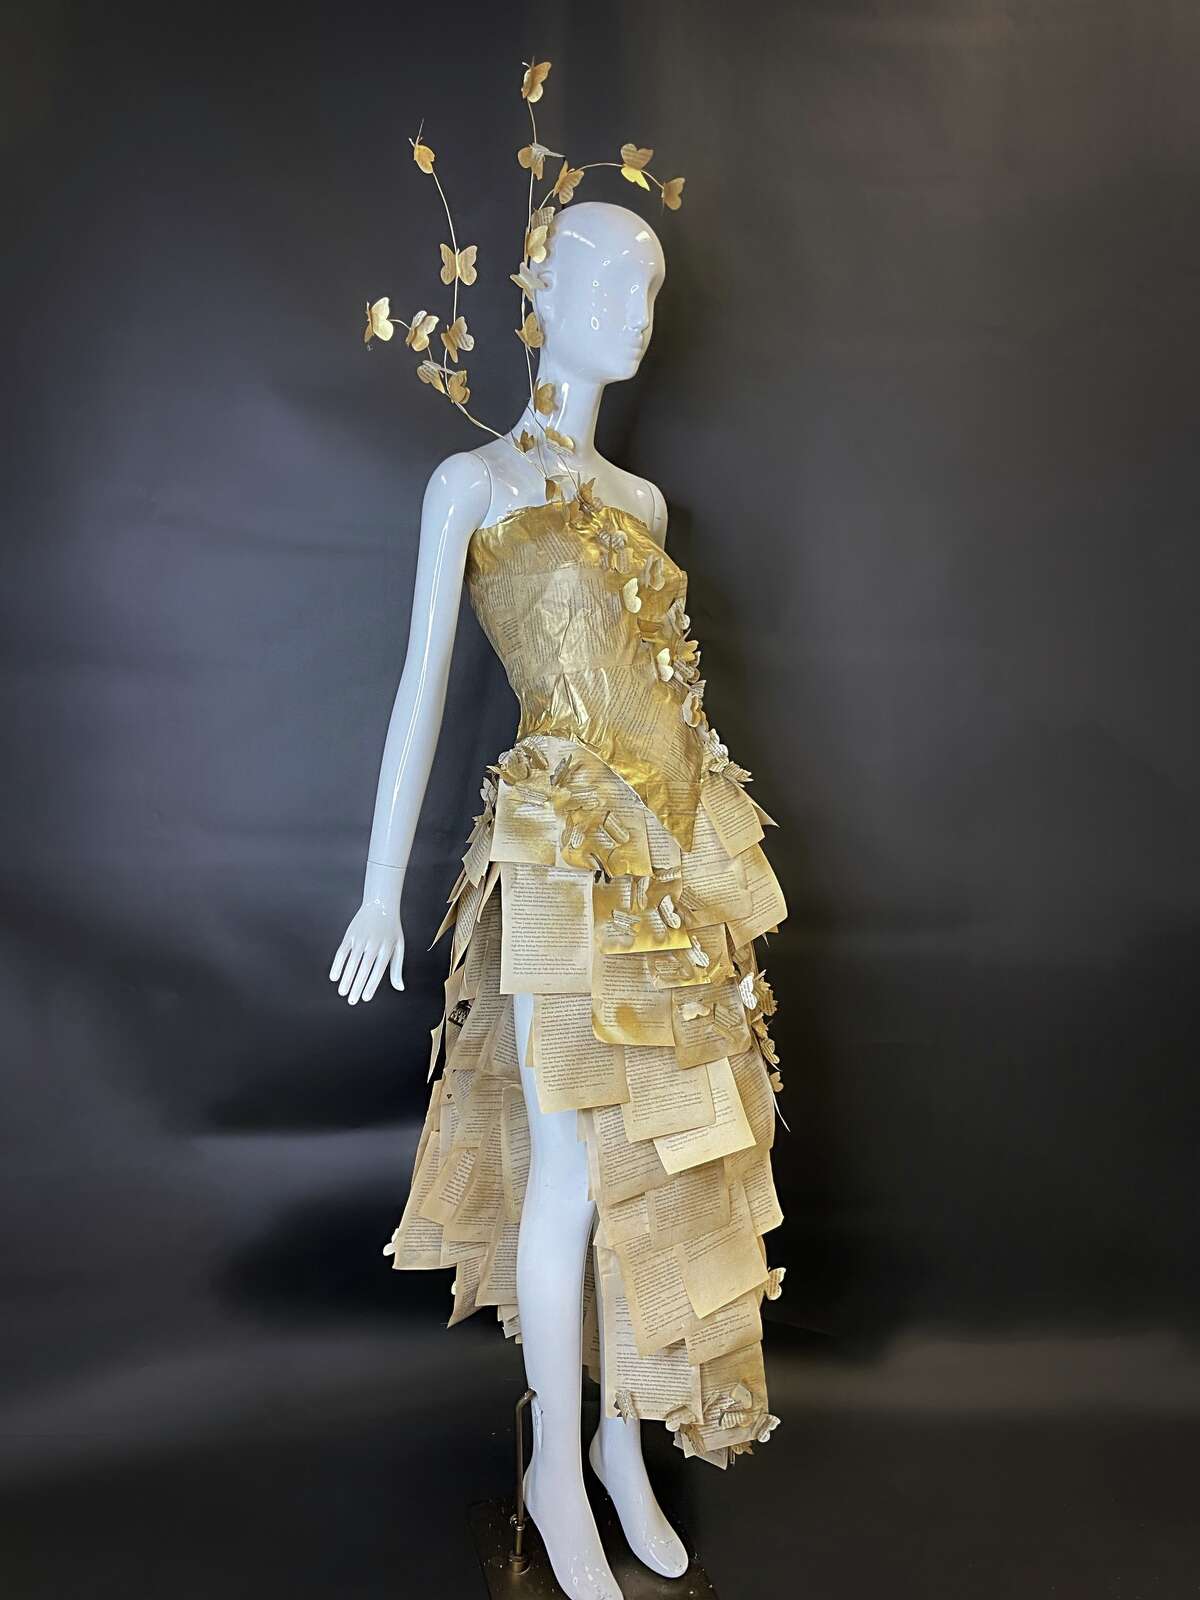 Leia, an eighth-grader at Jackson Middle School in San Antonio, used wire and glue to transform 200 pages of a Harry Potter book into a haute couture dress. 